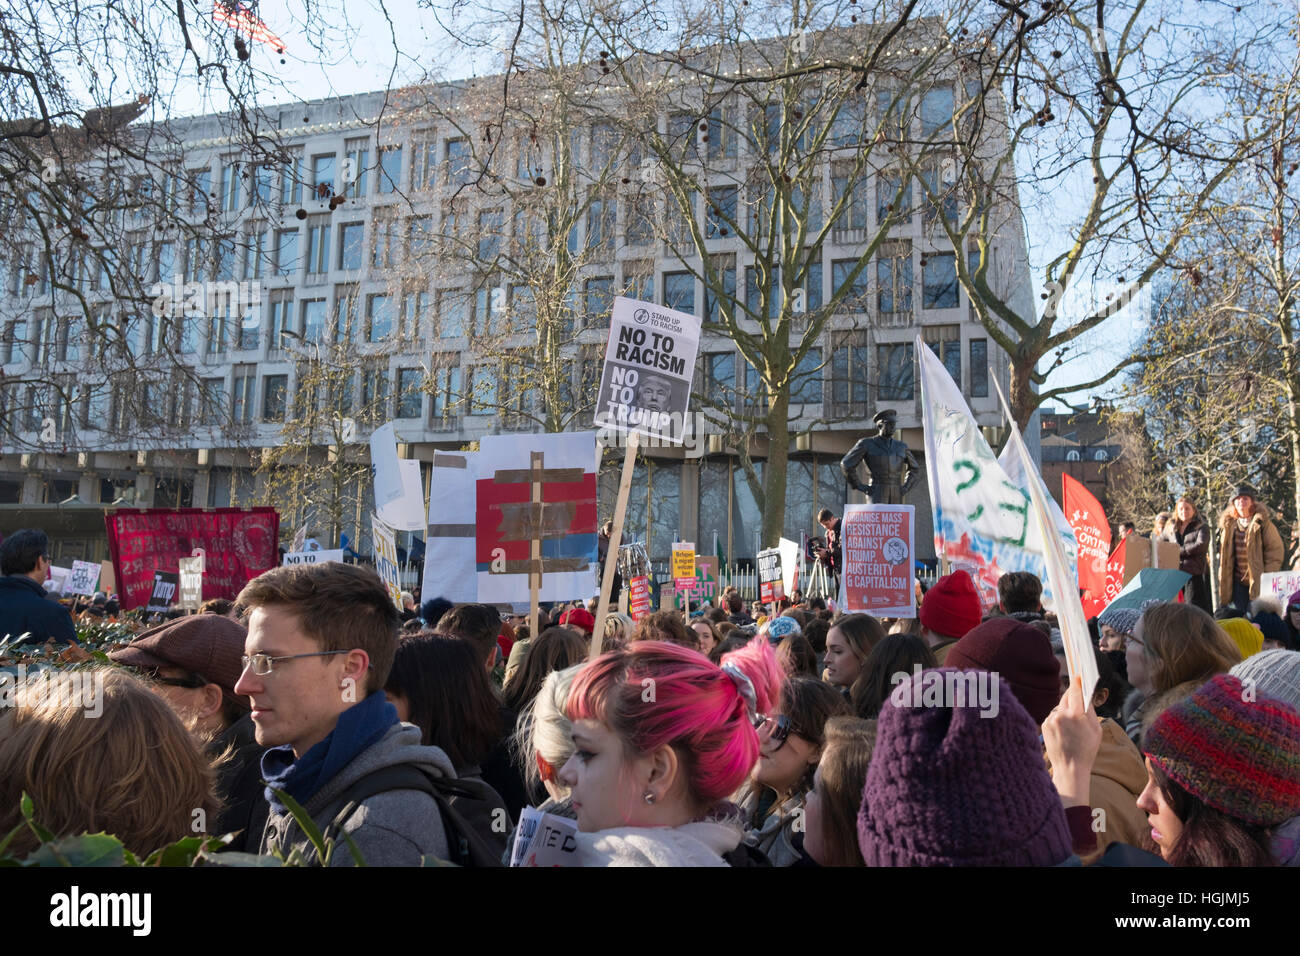 London, UK. 21st January, 2017. Anti Trump protestors in the Women's March in London outside the U.S. Emgassy the day after Donald Trump's inauguration in Grosvenor Square, London, UK Credit: Ellen Rooney/Alamy Live News Stock Photo